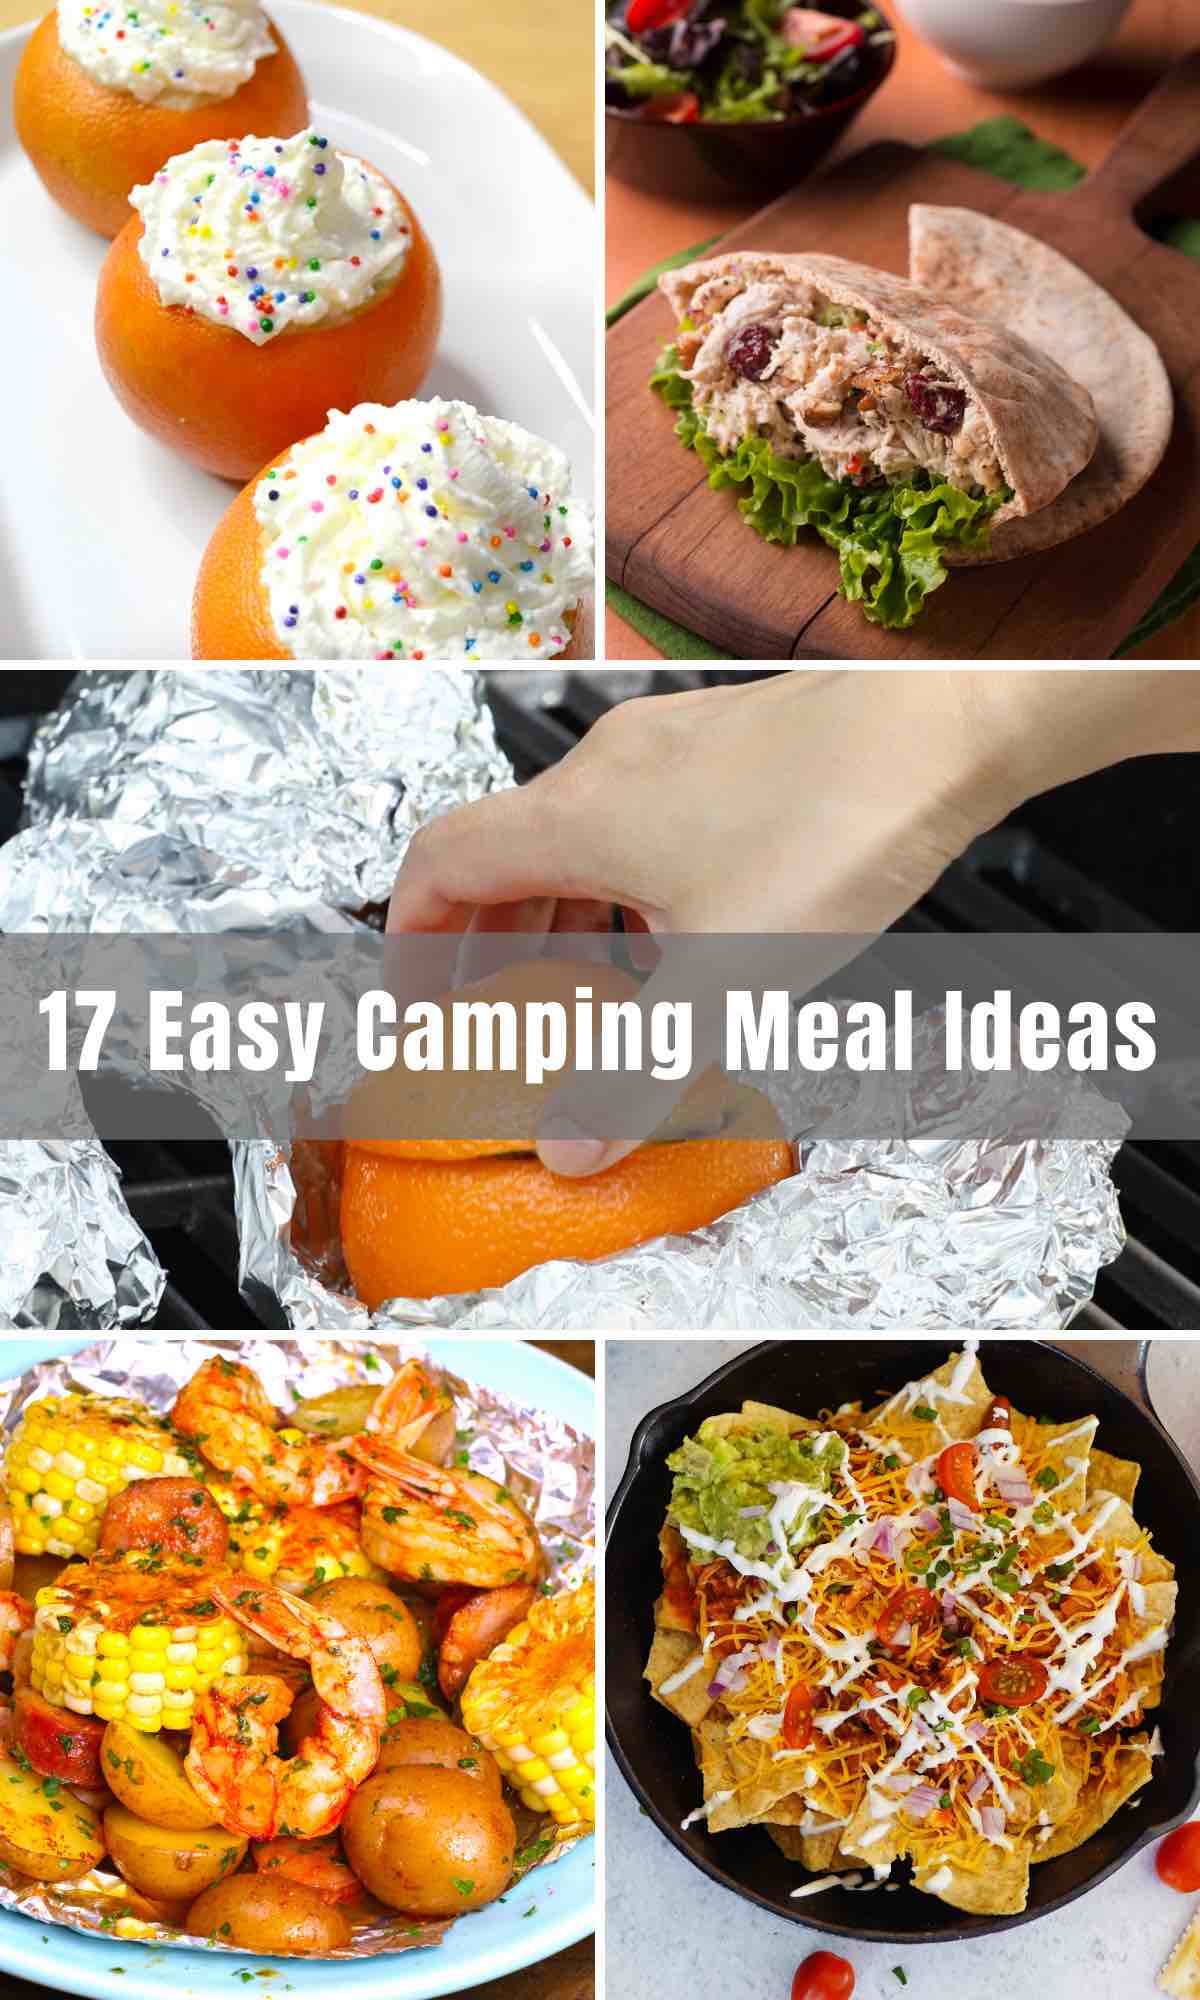 Campfires and comfort food go hand in hand. We’ll take you through 17 Easy Camping Meals - from delicious breakfast, dinner, and desserts…even camping food that you can make ahead of time!